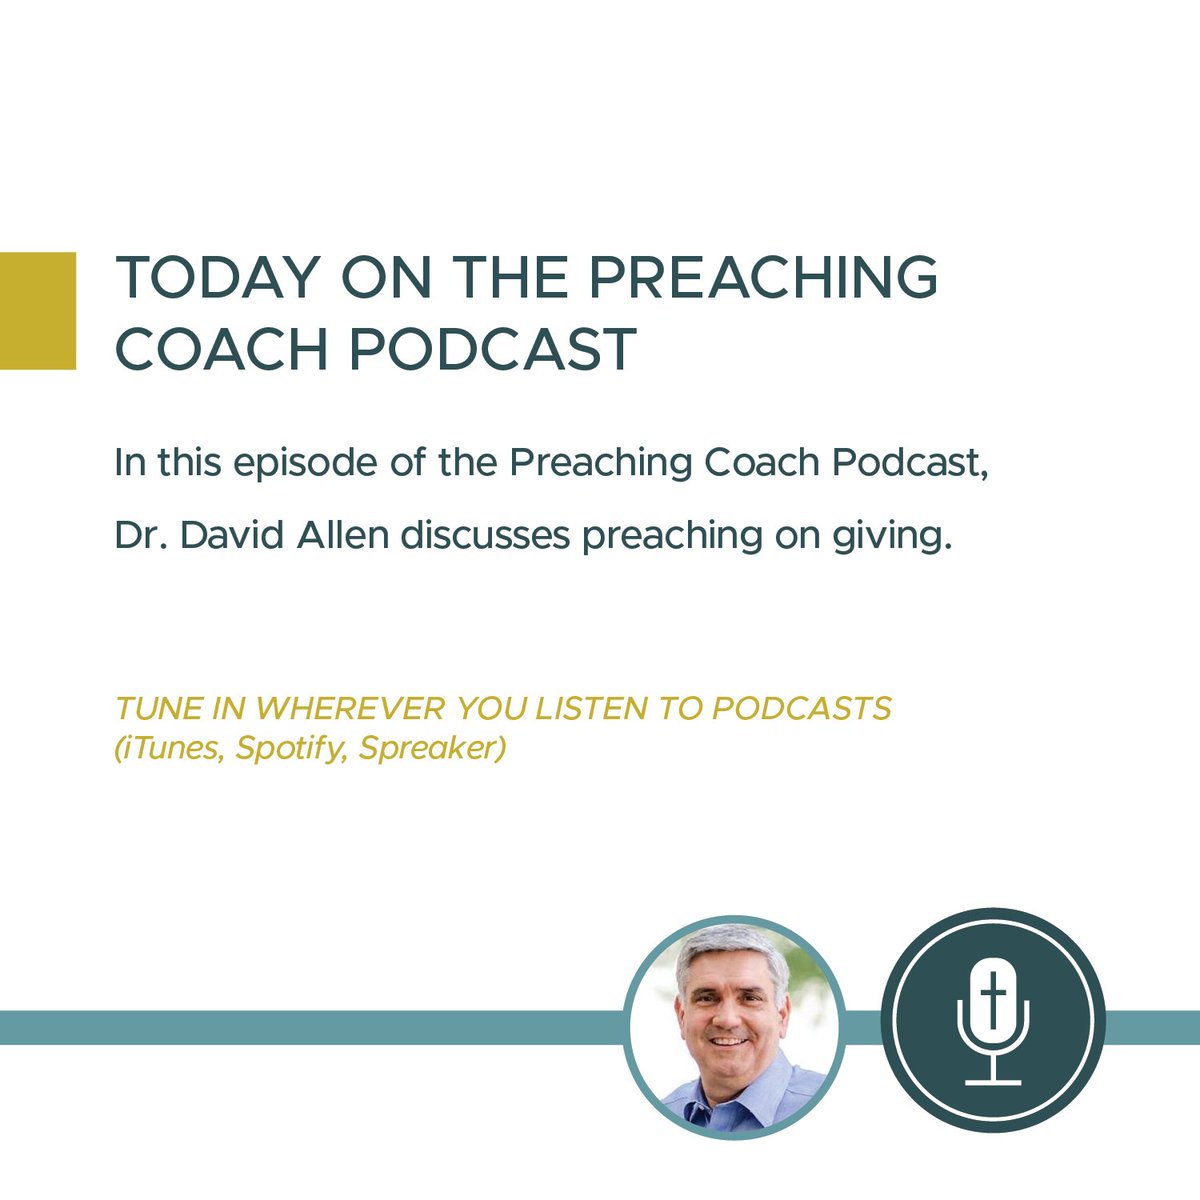 The Preaching Coach Podcast: In this episode, Dr. David Allen discusses preaching on the subject of giving. Listen today on iTunes, Spotify, and Spreaker, or follow the link below. Listen: spreaker.com/episode/preach…